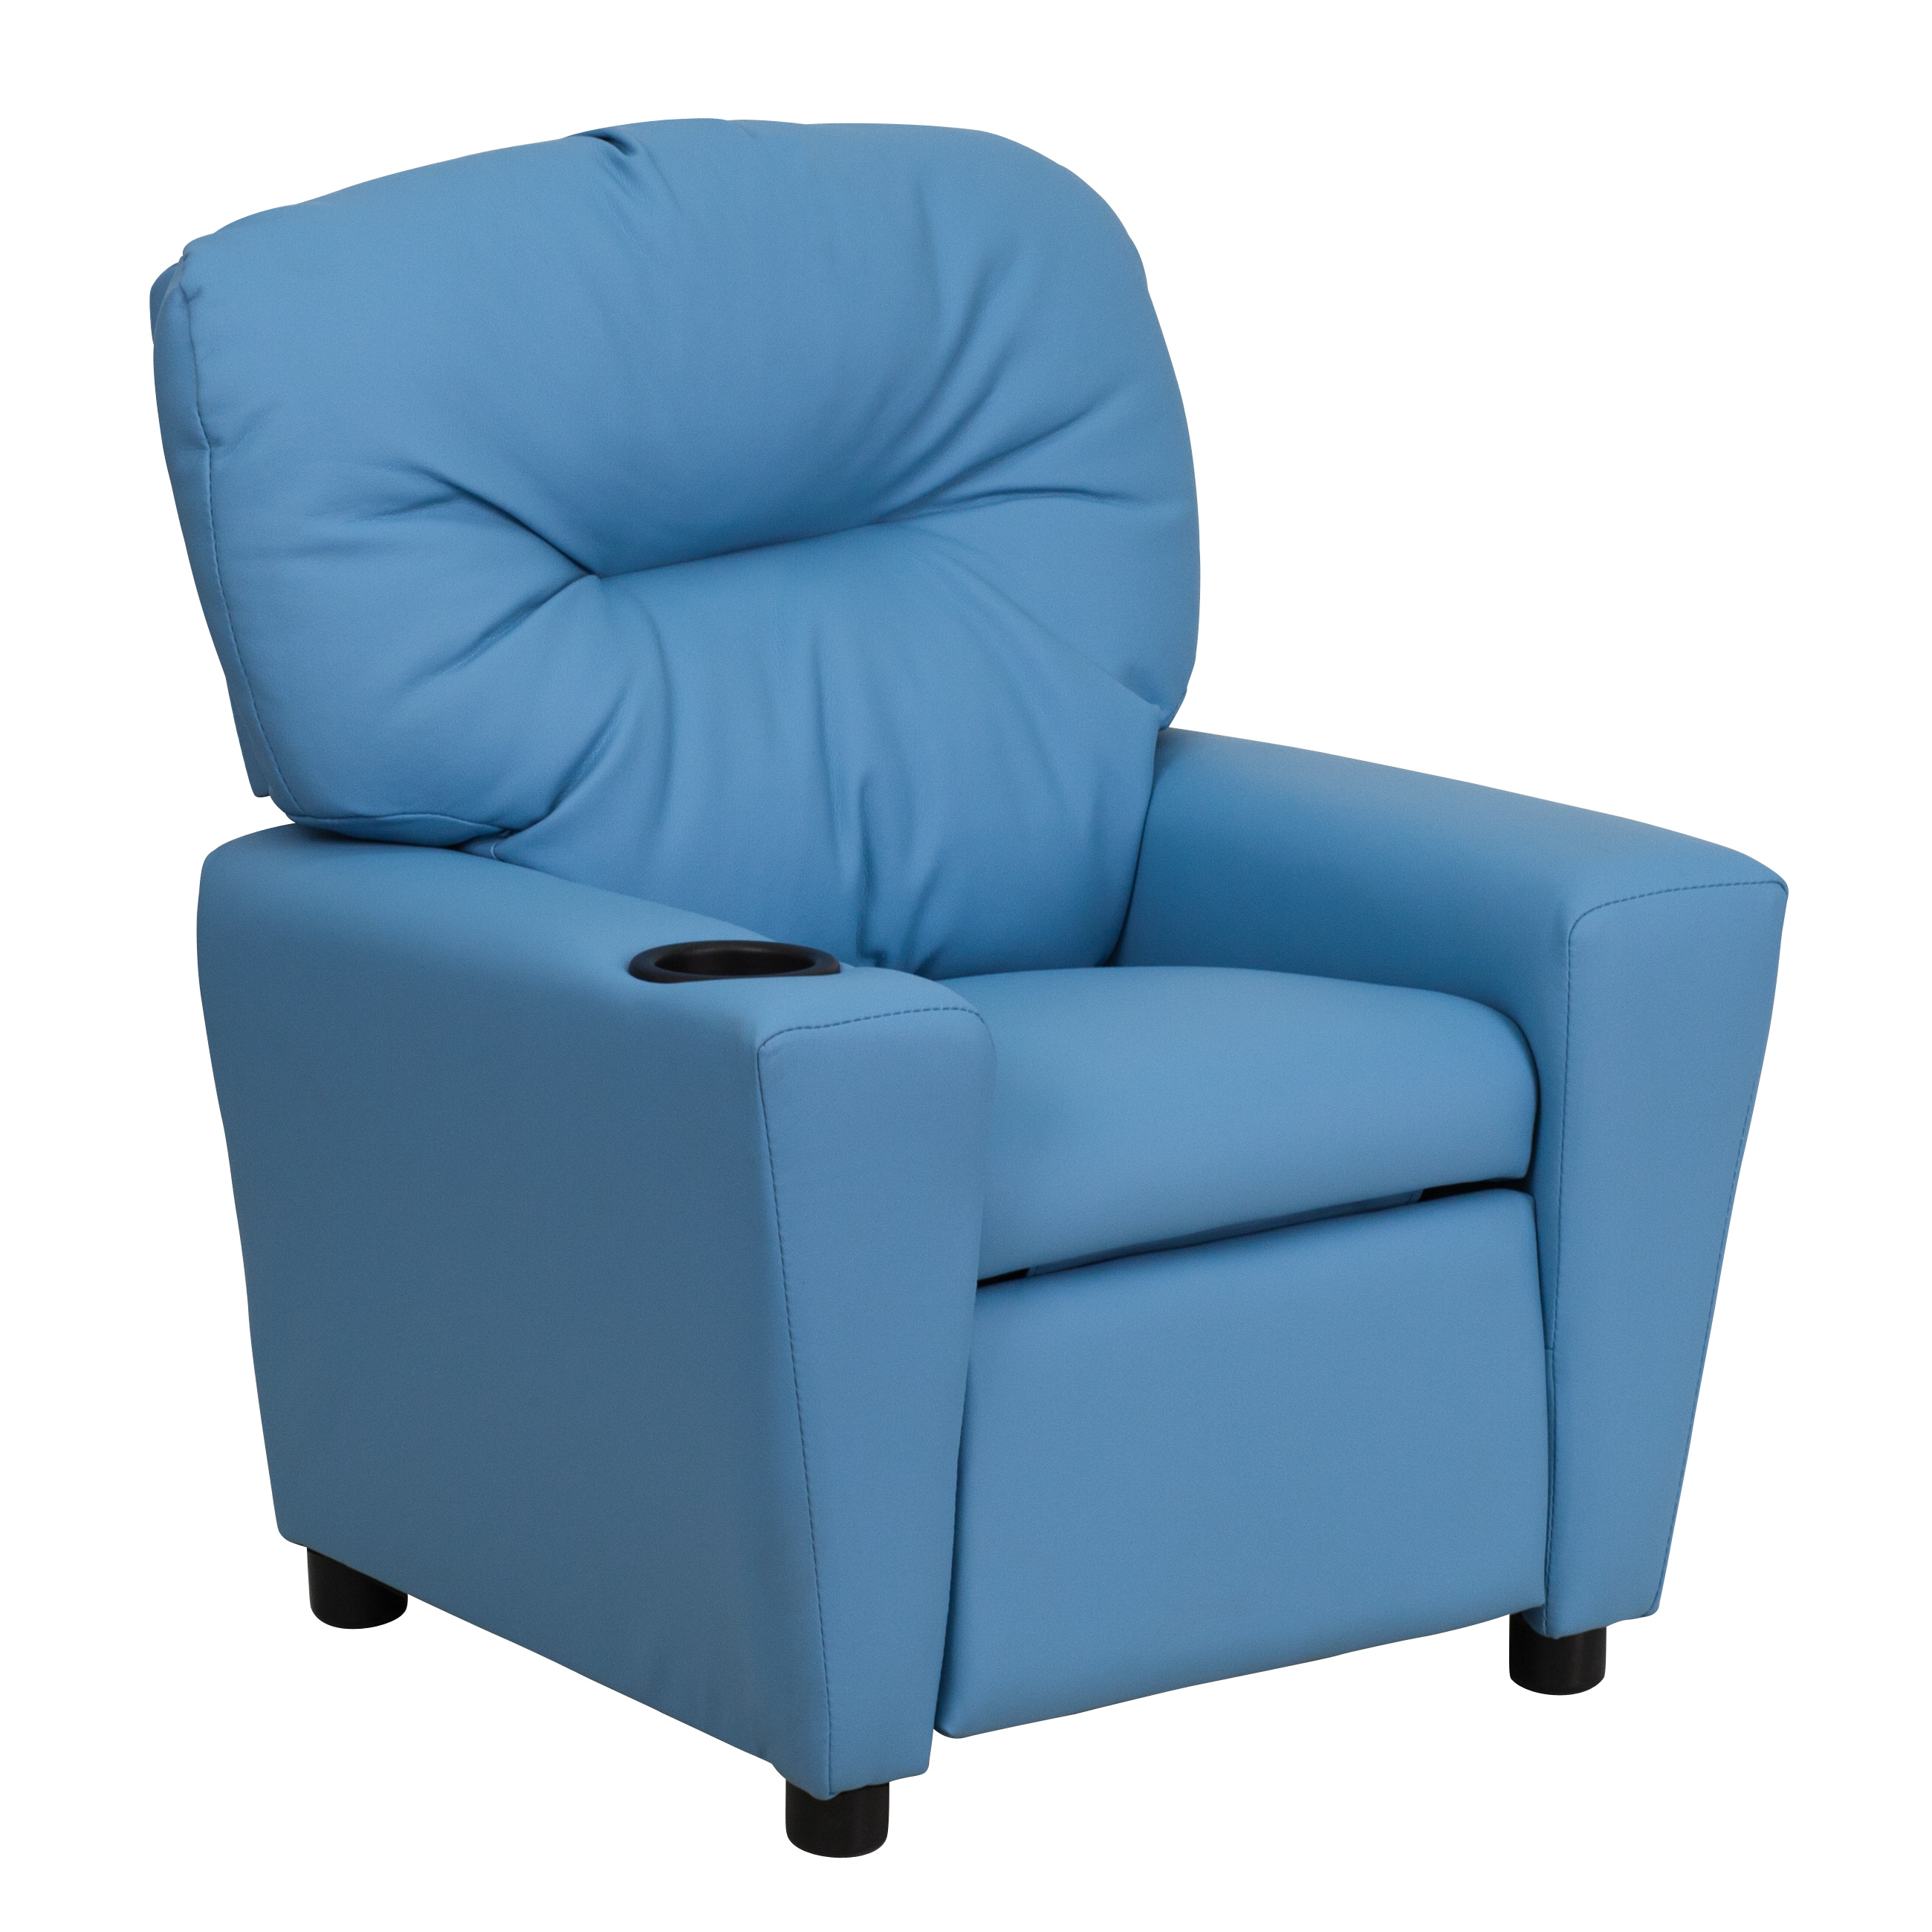 Simple Toddler Recliner Chair With Name for Large Space